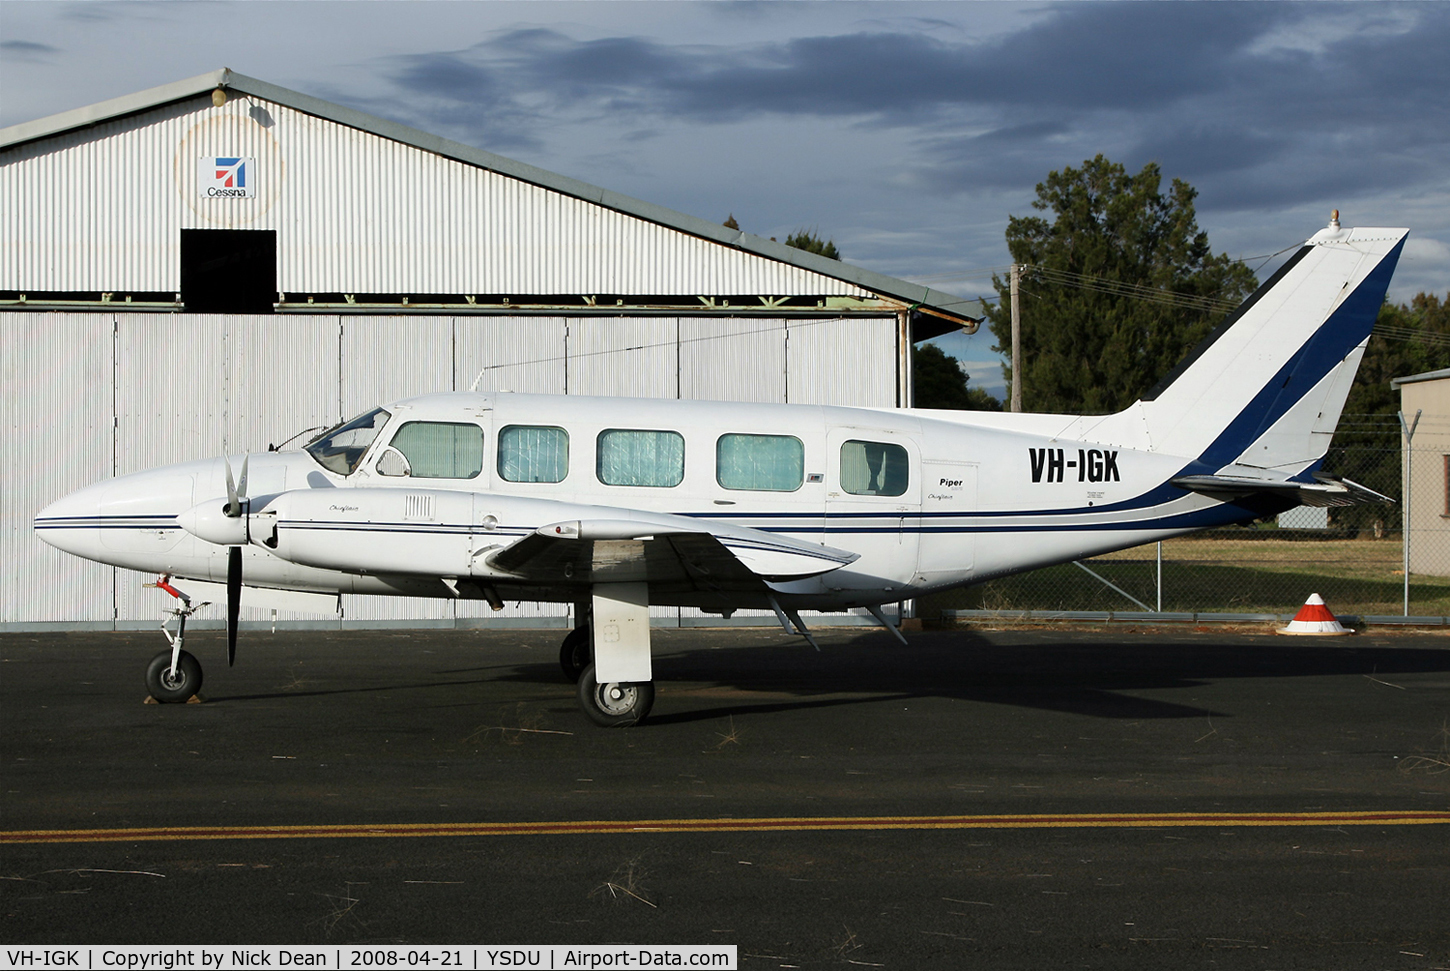 VH-IGK, 1977 Piper PA-31-350 Chieftain C/N 31-7752190, /